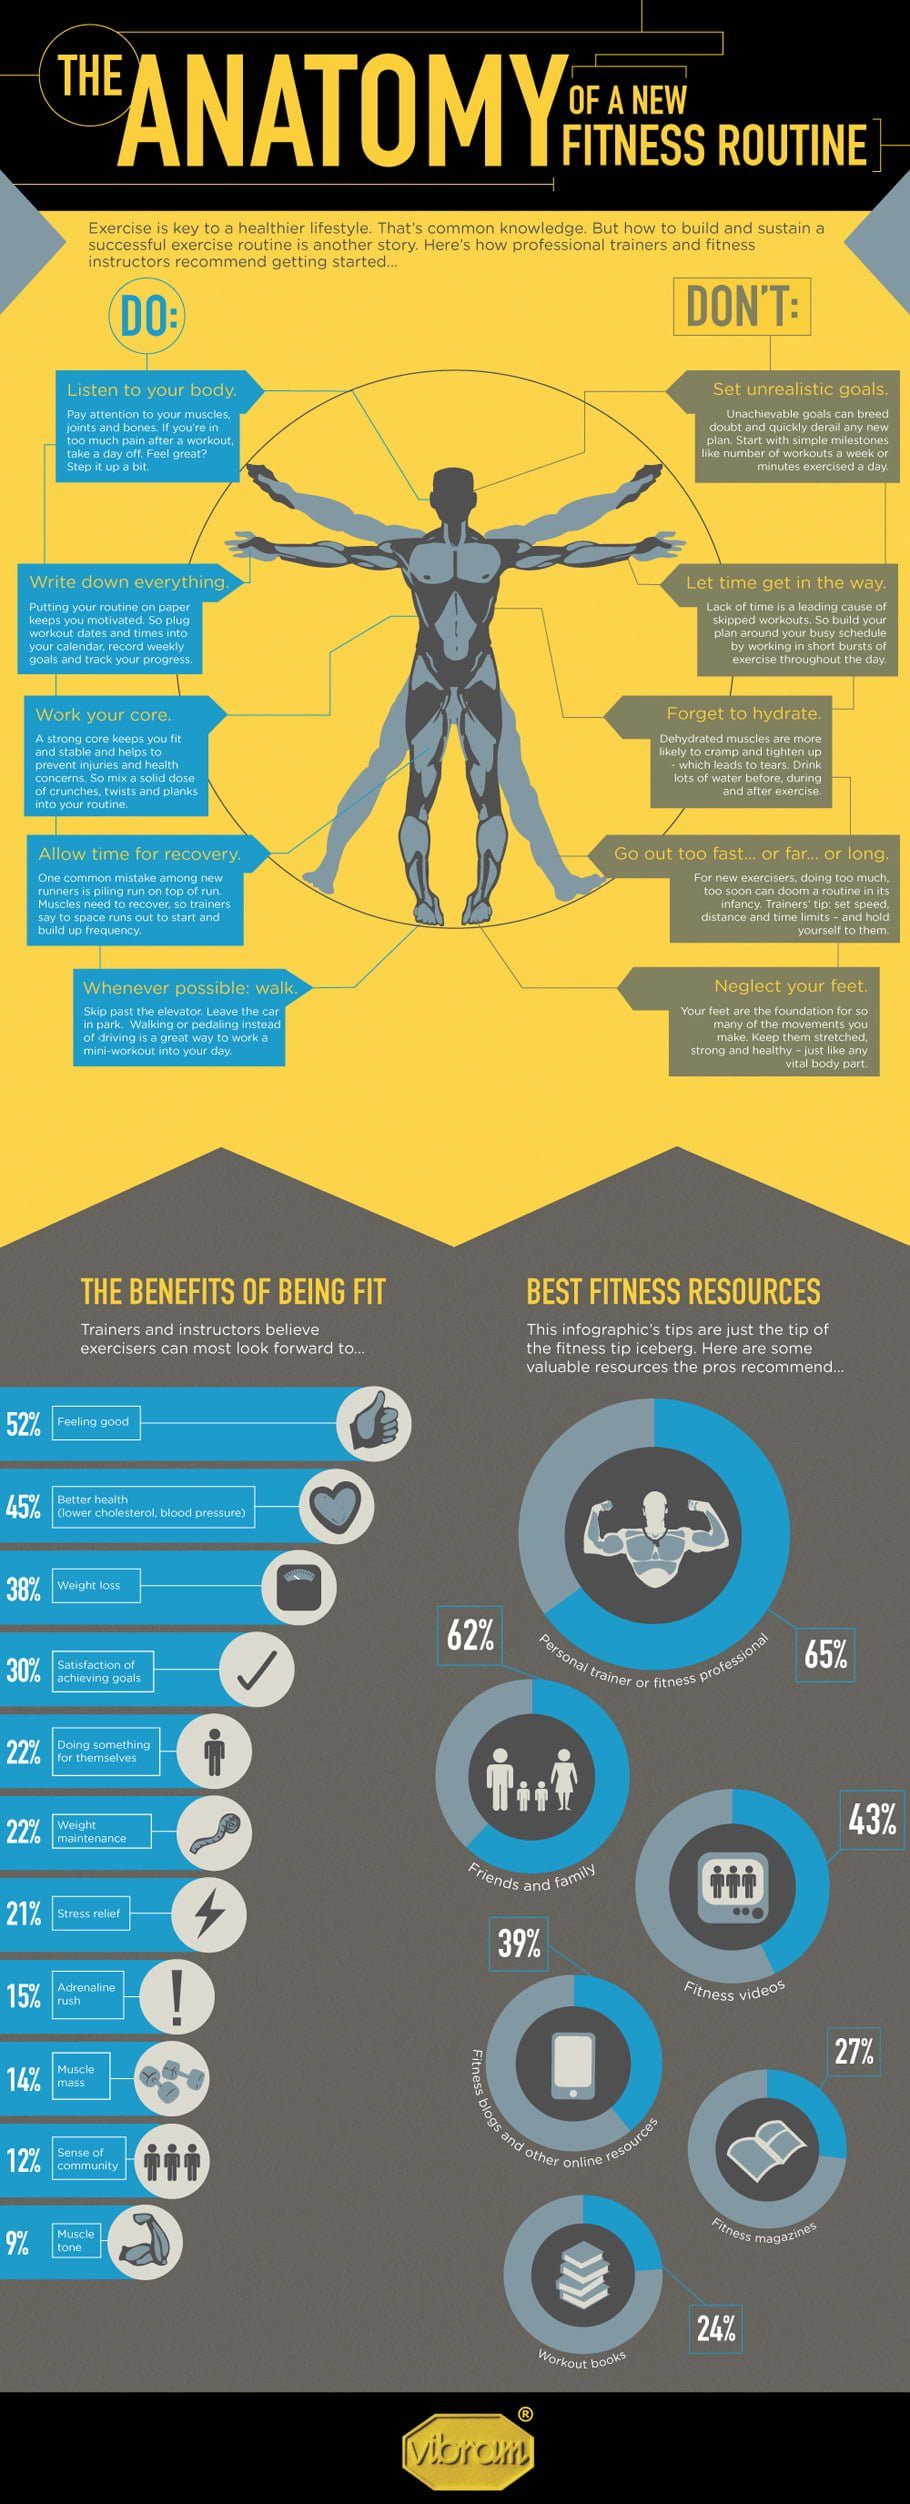 The Anatomy of A New Fitness Routine Infographic